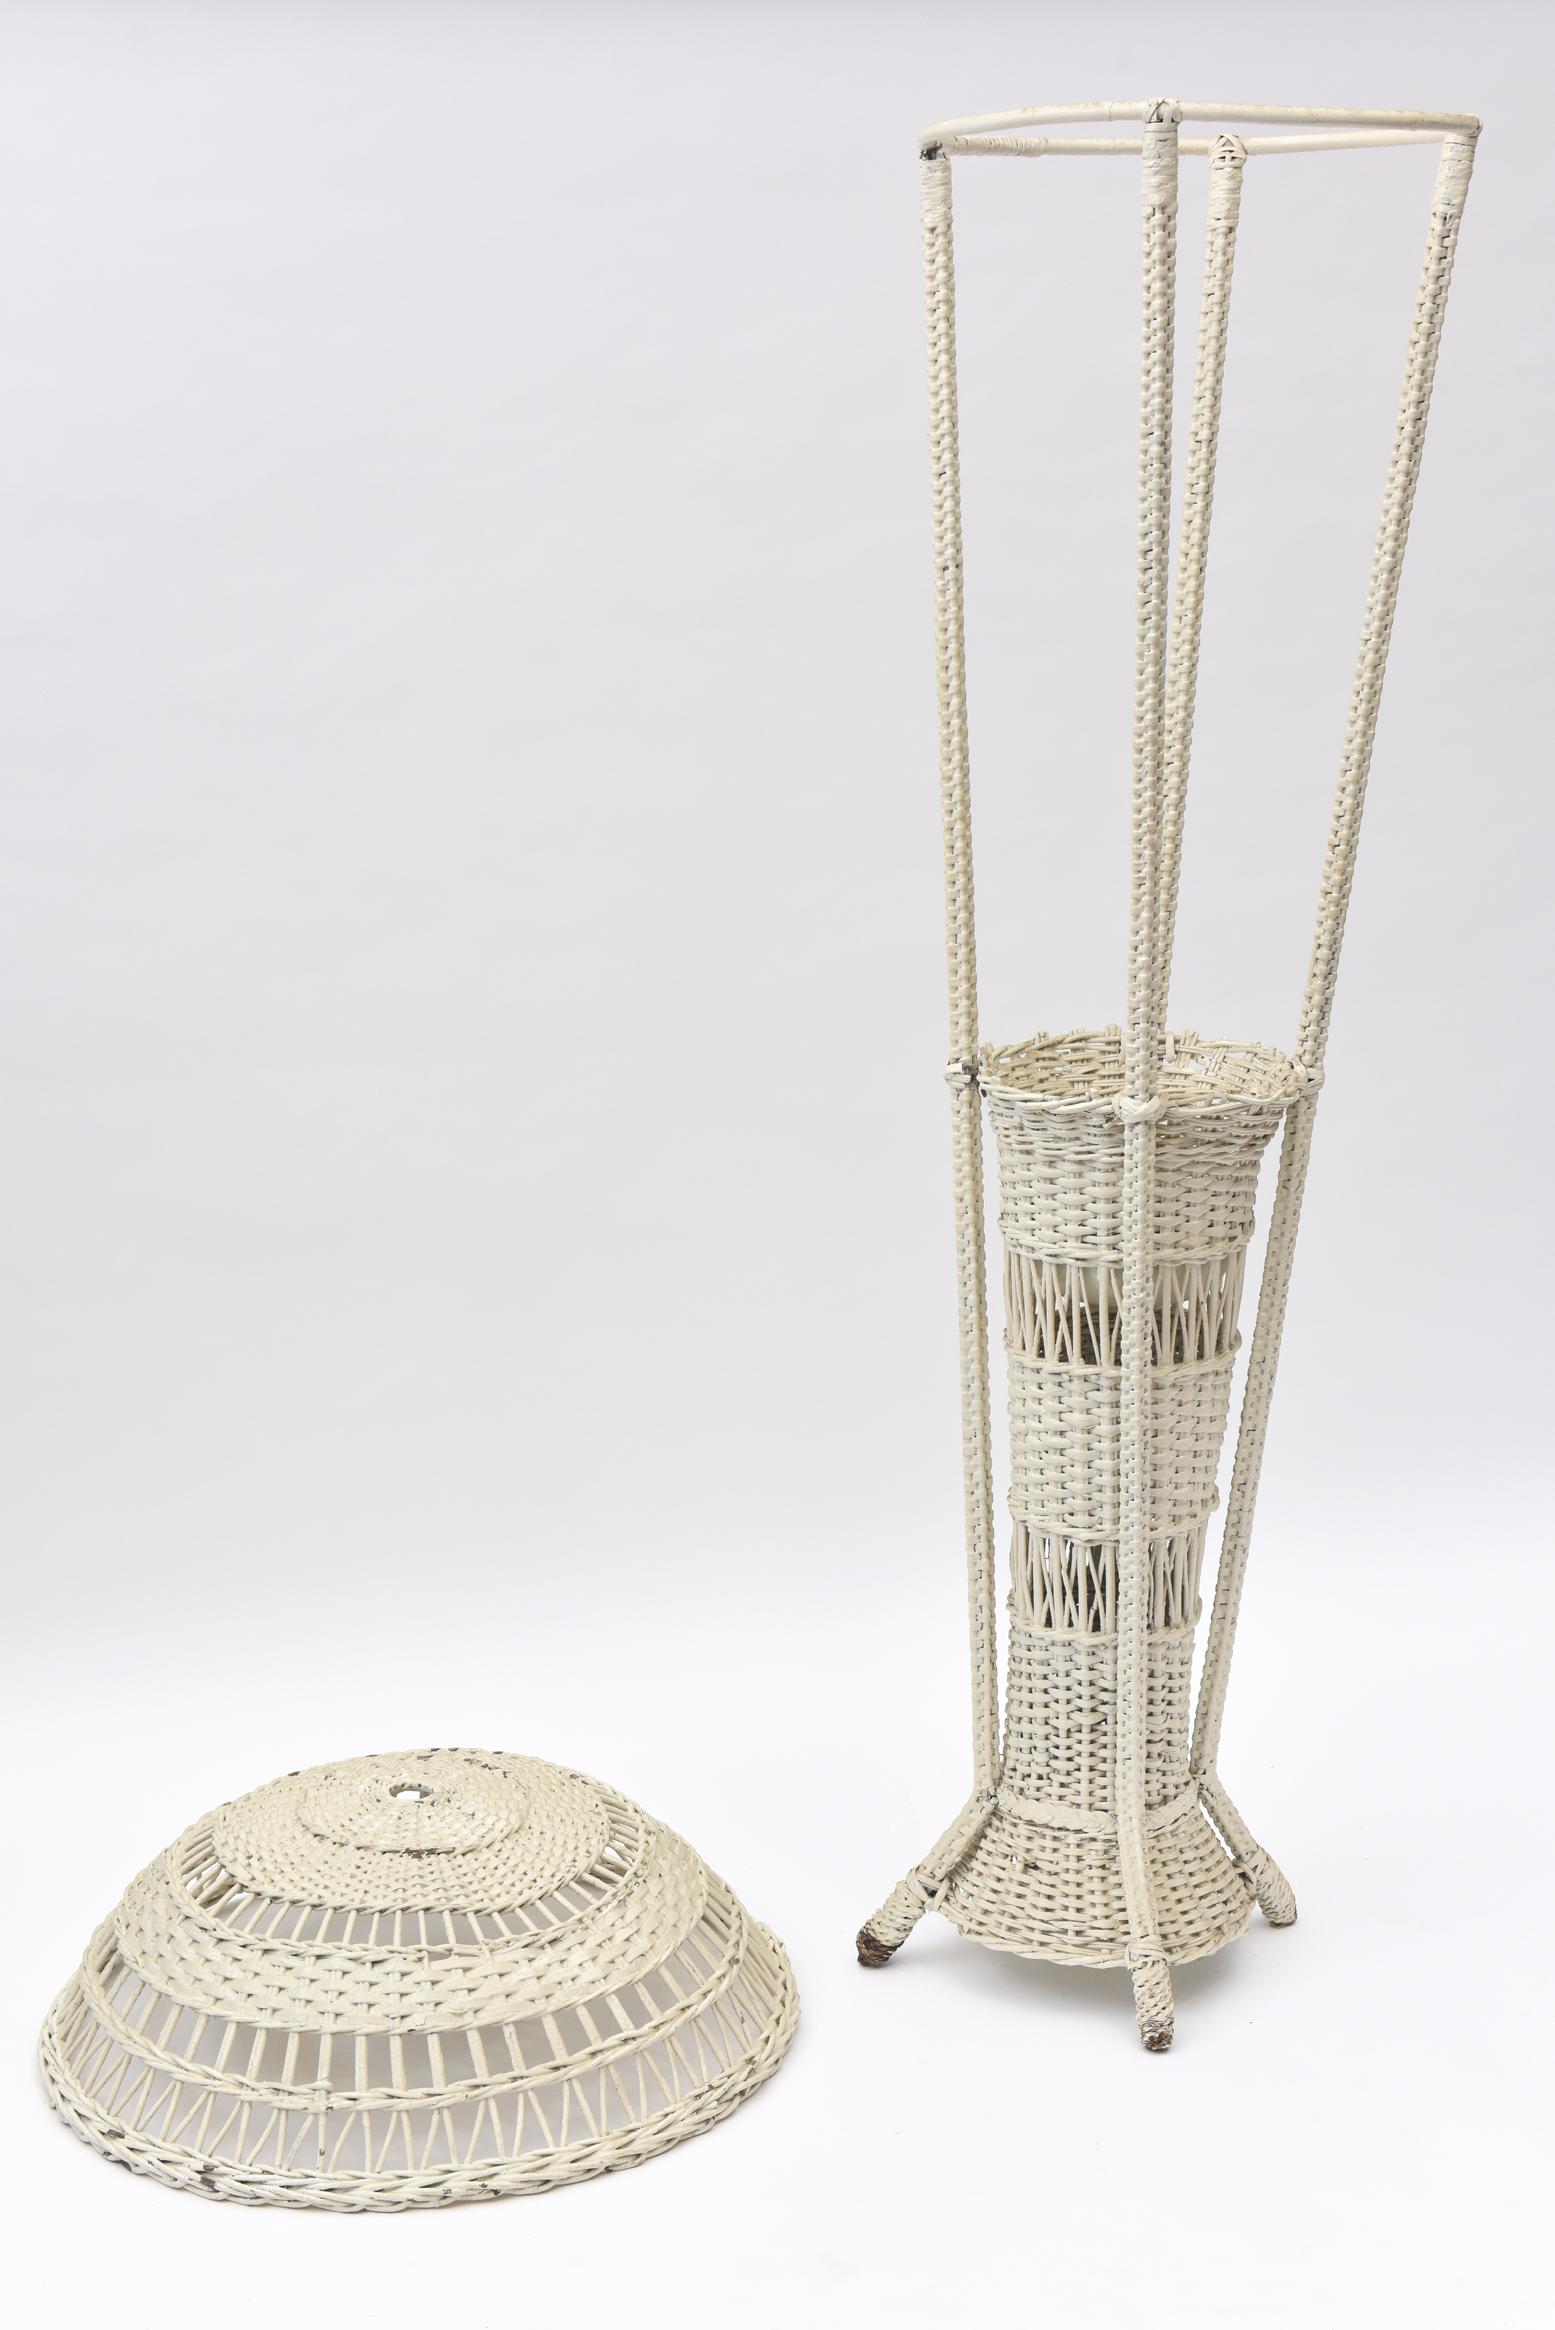 Woven Wicker Standing Floor Lamp Early 20th Century with Flower Vase Insert Base For Sale